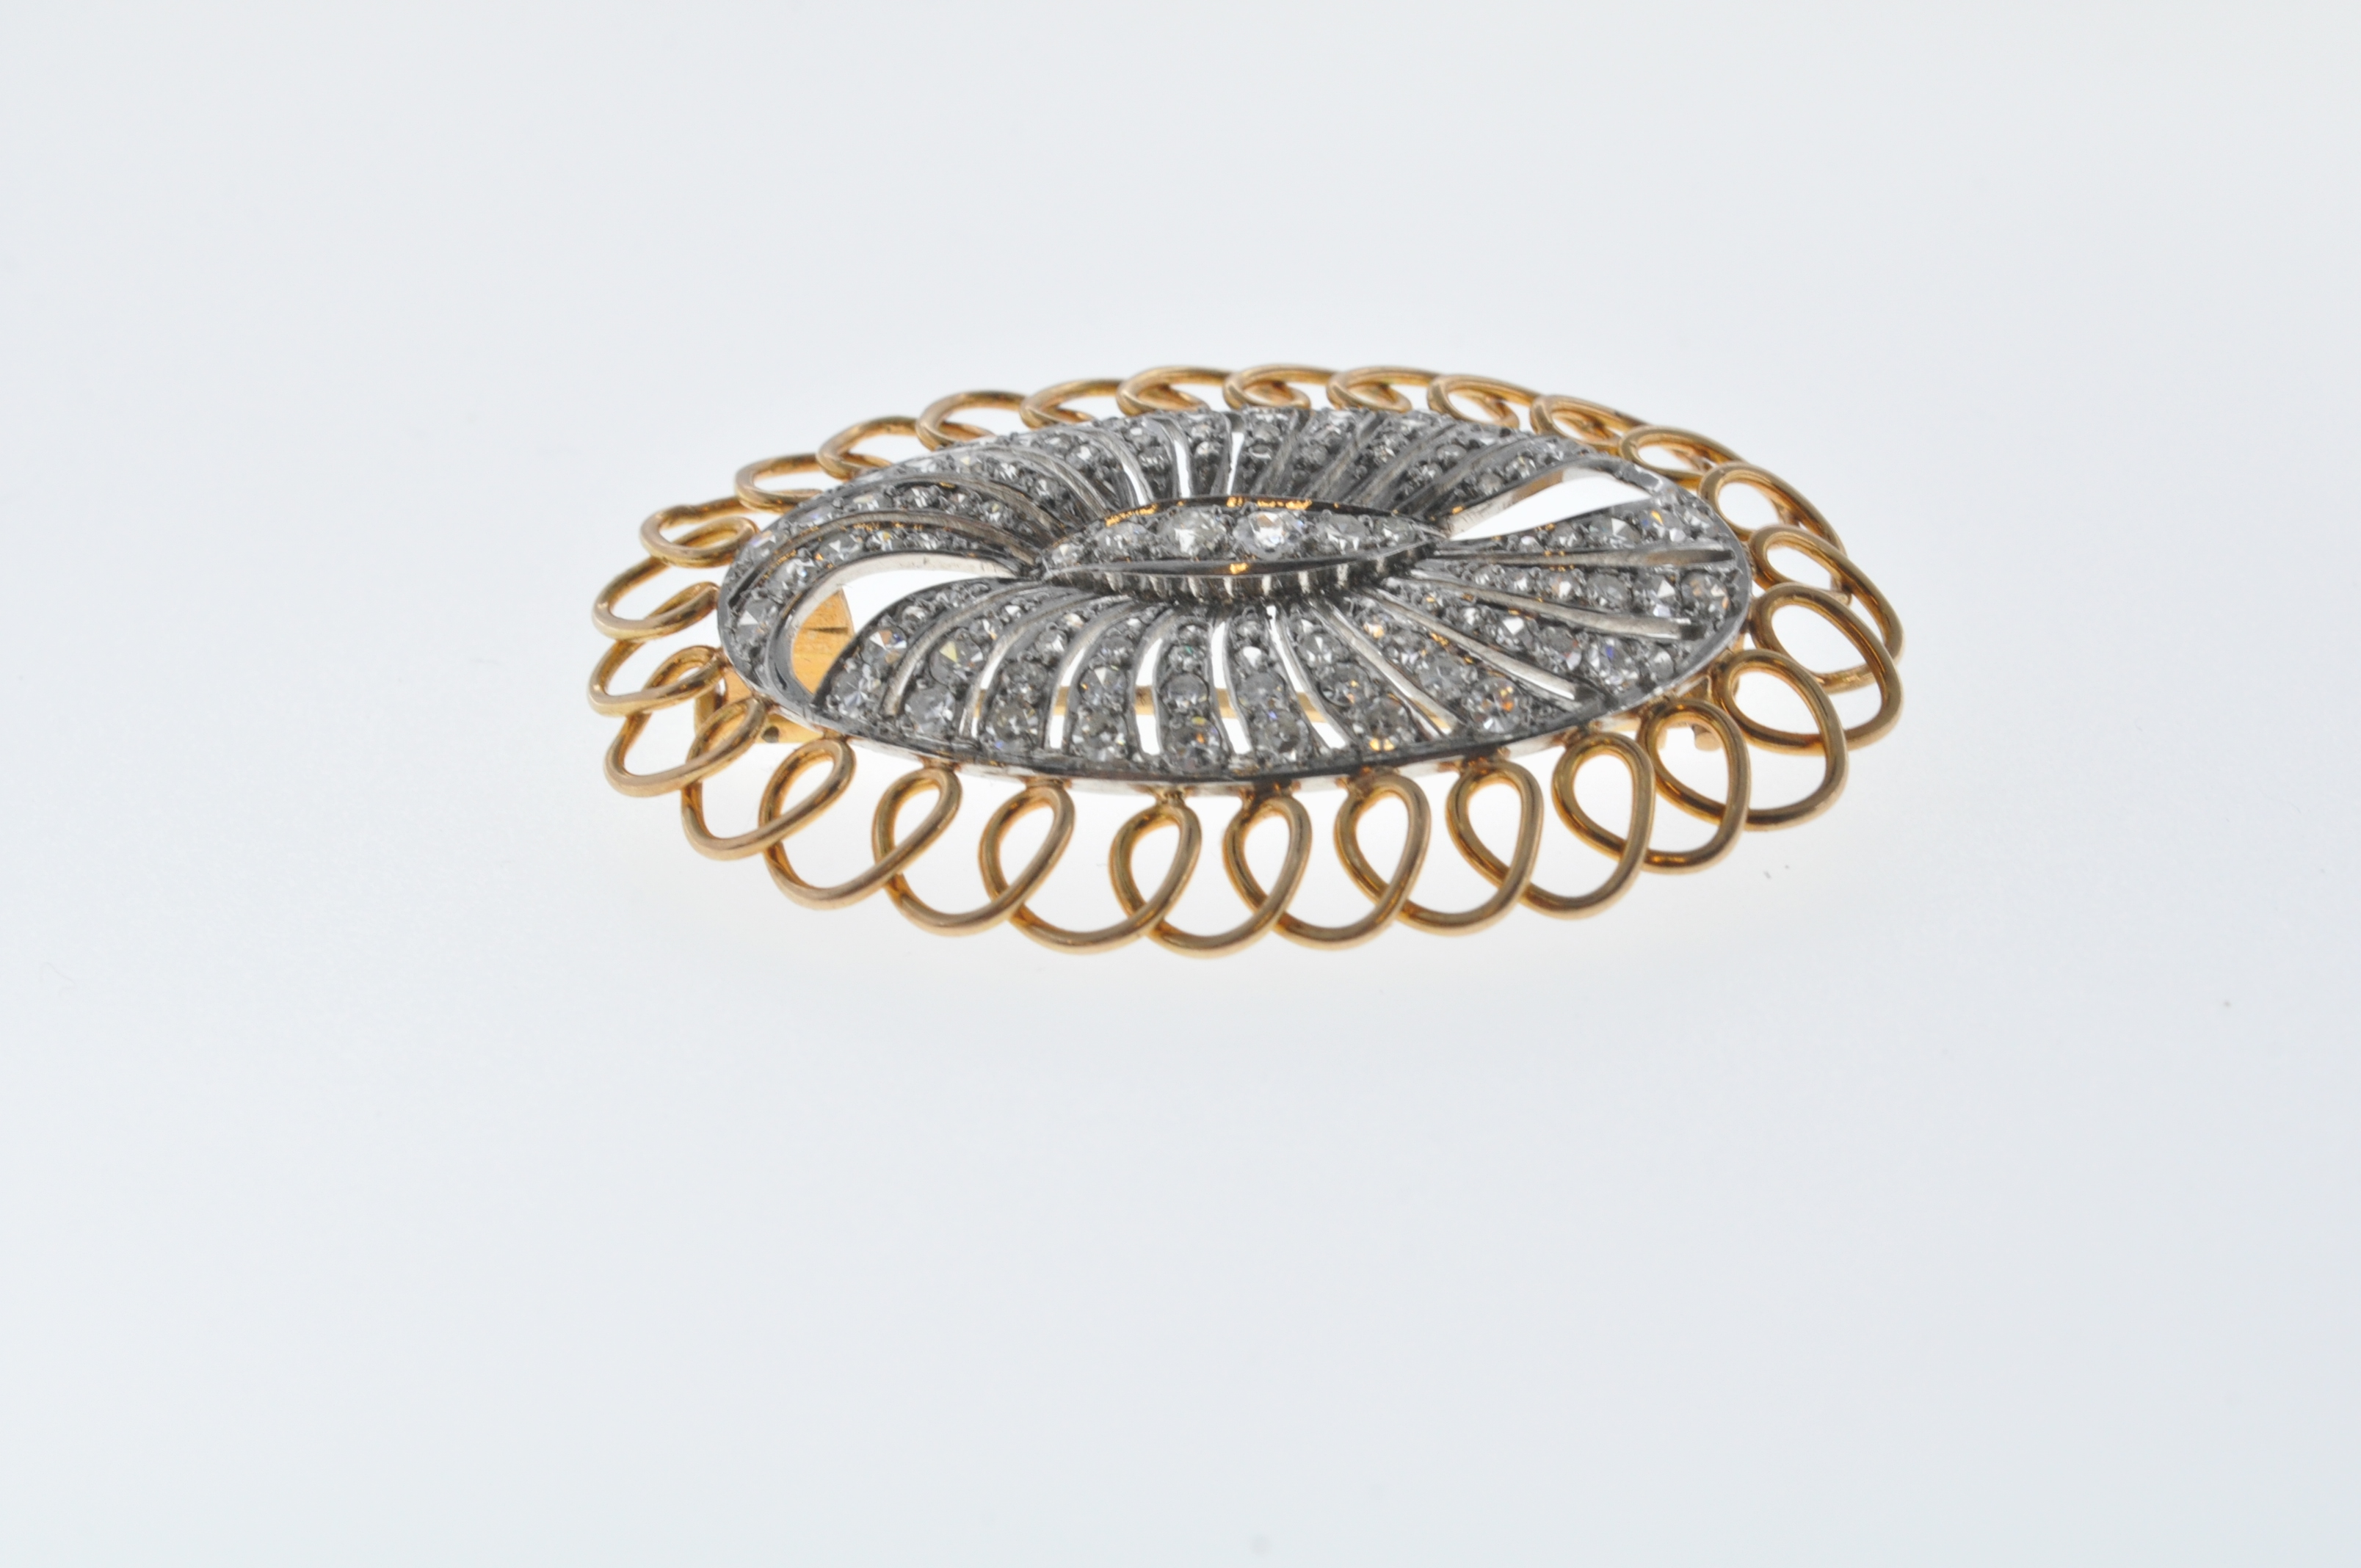 VINTAGE GOLD AND DIAMOND OVAL BROOCH - Image 6 of 6